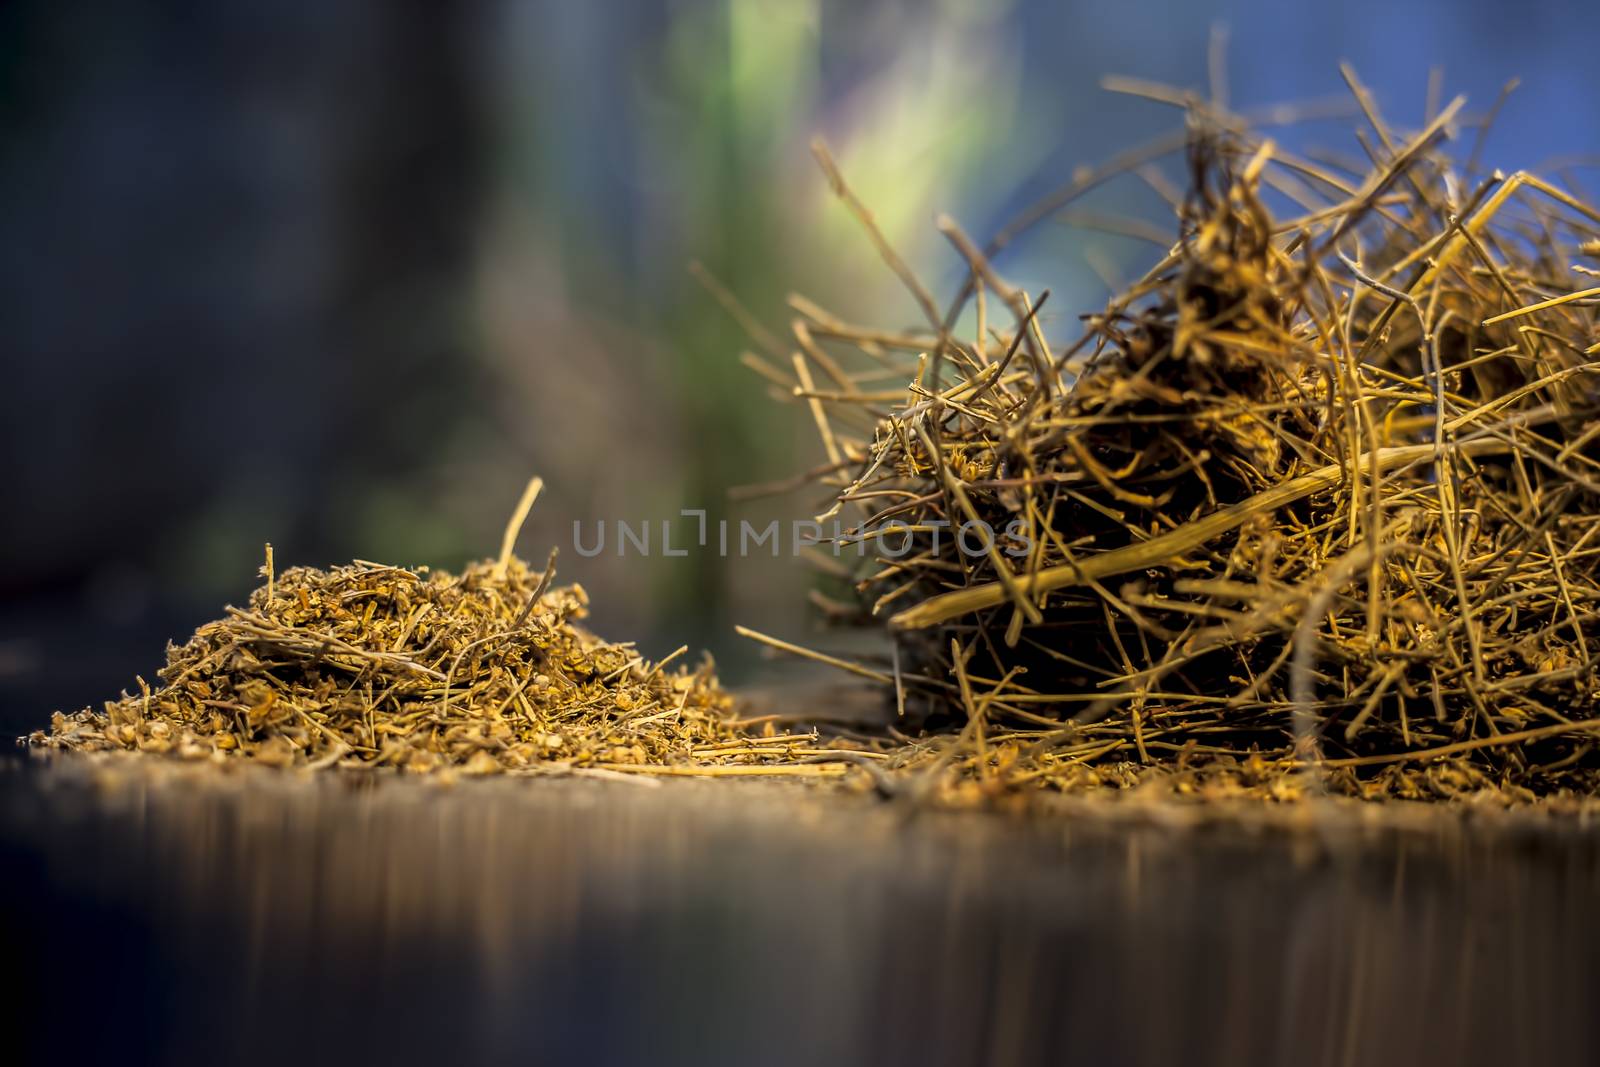 Close up shot of ayurvedic memory booster herb shankhpushpi or Convolvulus pluricaulis roots on black wooden surface with selective focus and blurred background.